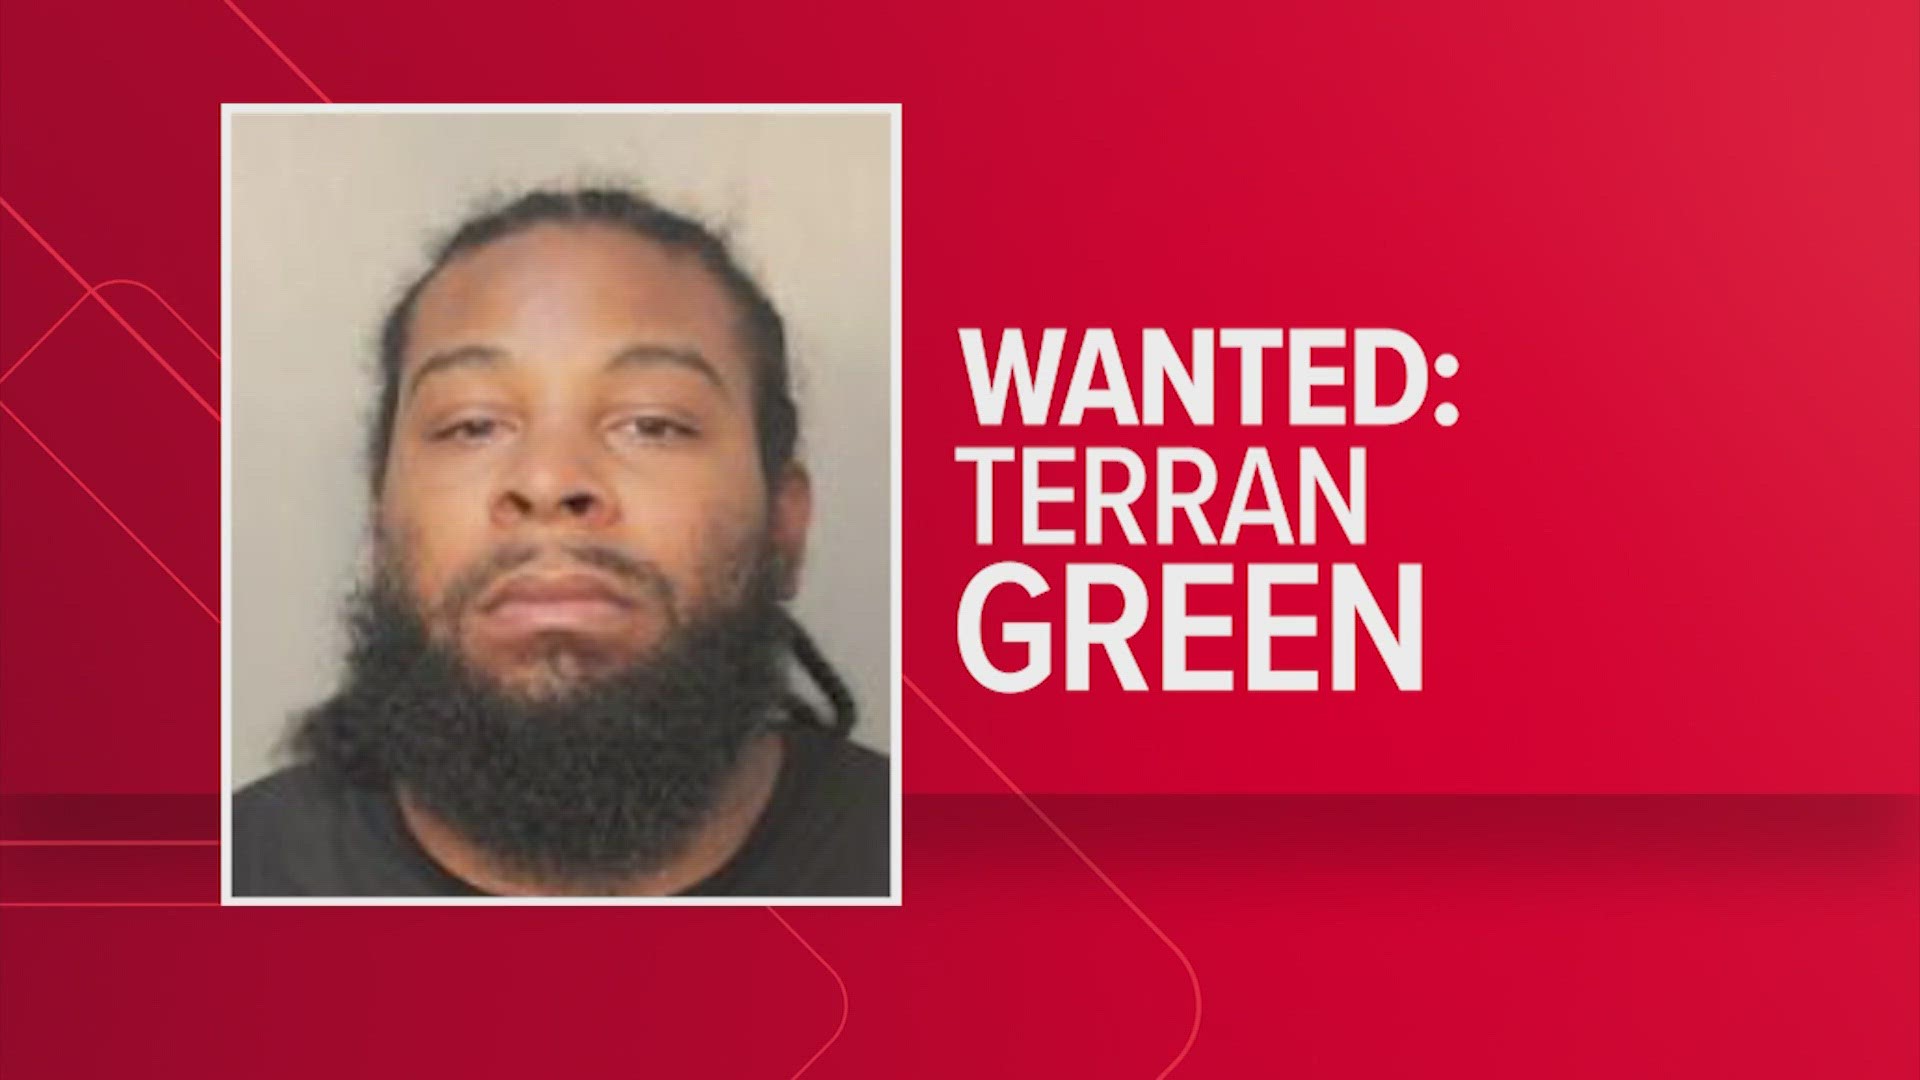 The search continues for Terran Green, the man accused of shooting HCSO deputy Joseph Anderson during a traffic stop.